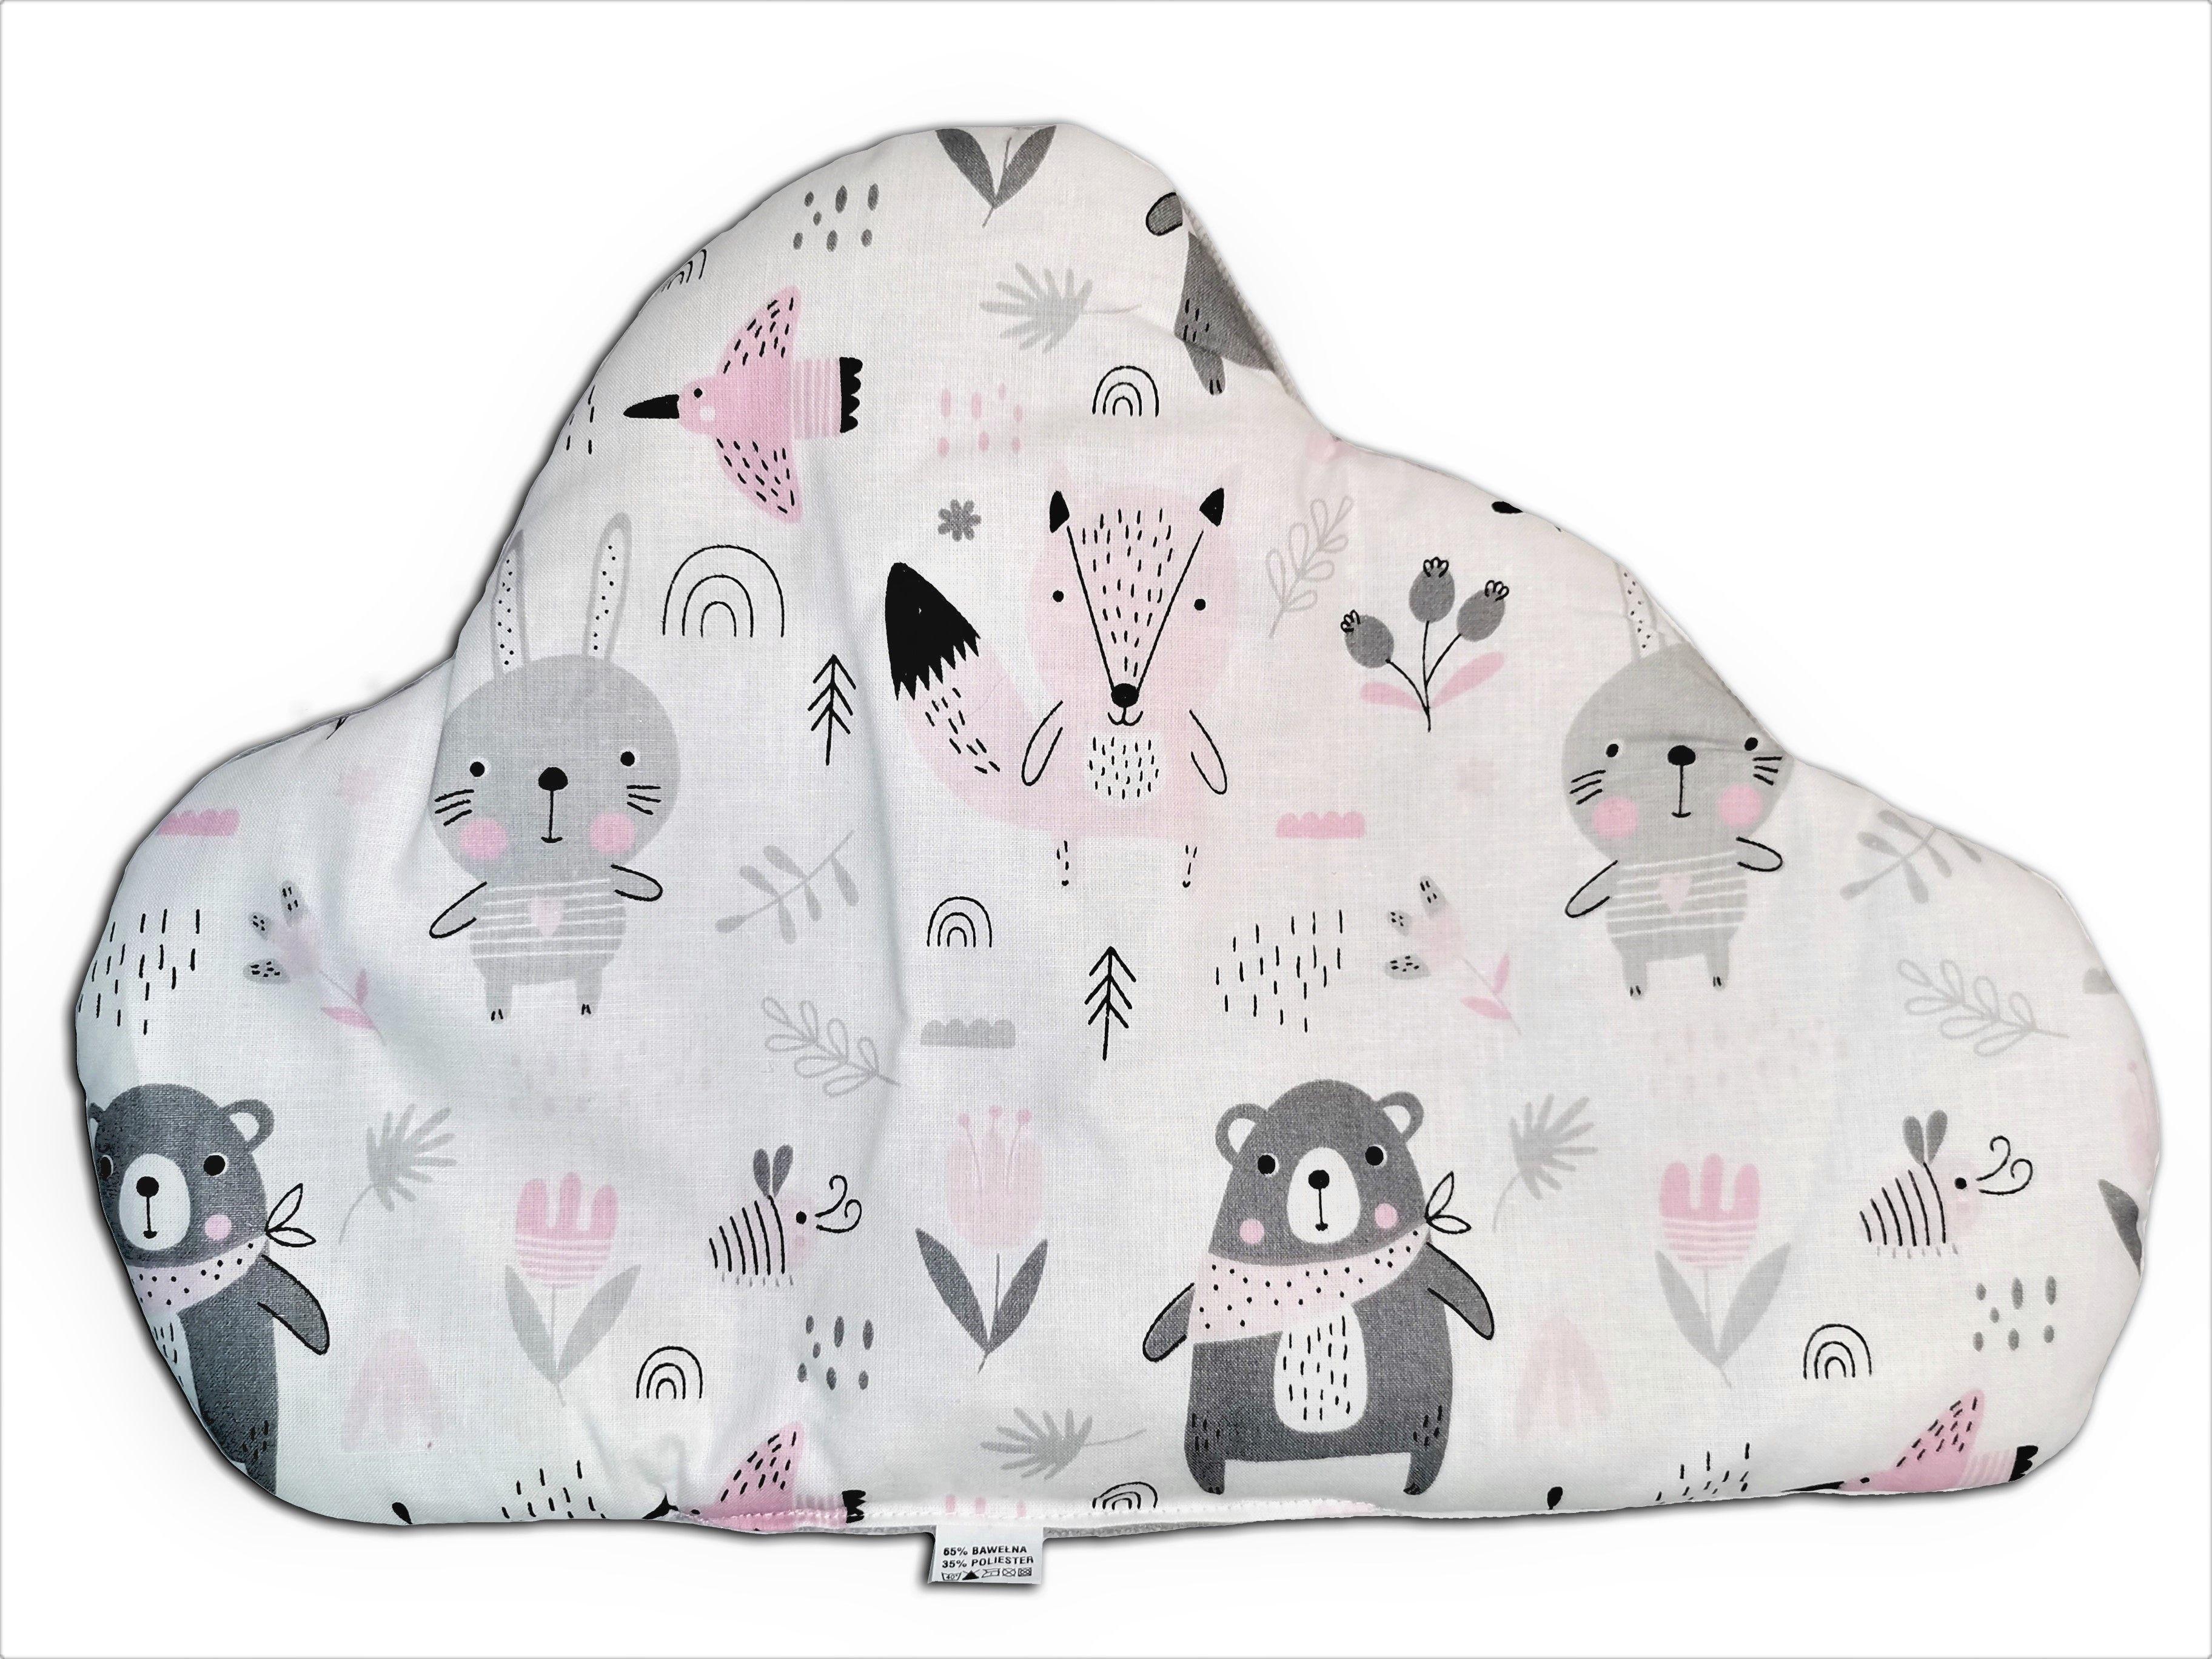 Stroller set 3in1 - pink bunnies, POLISH PRODUCT 100% COTTON